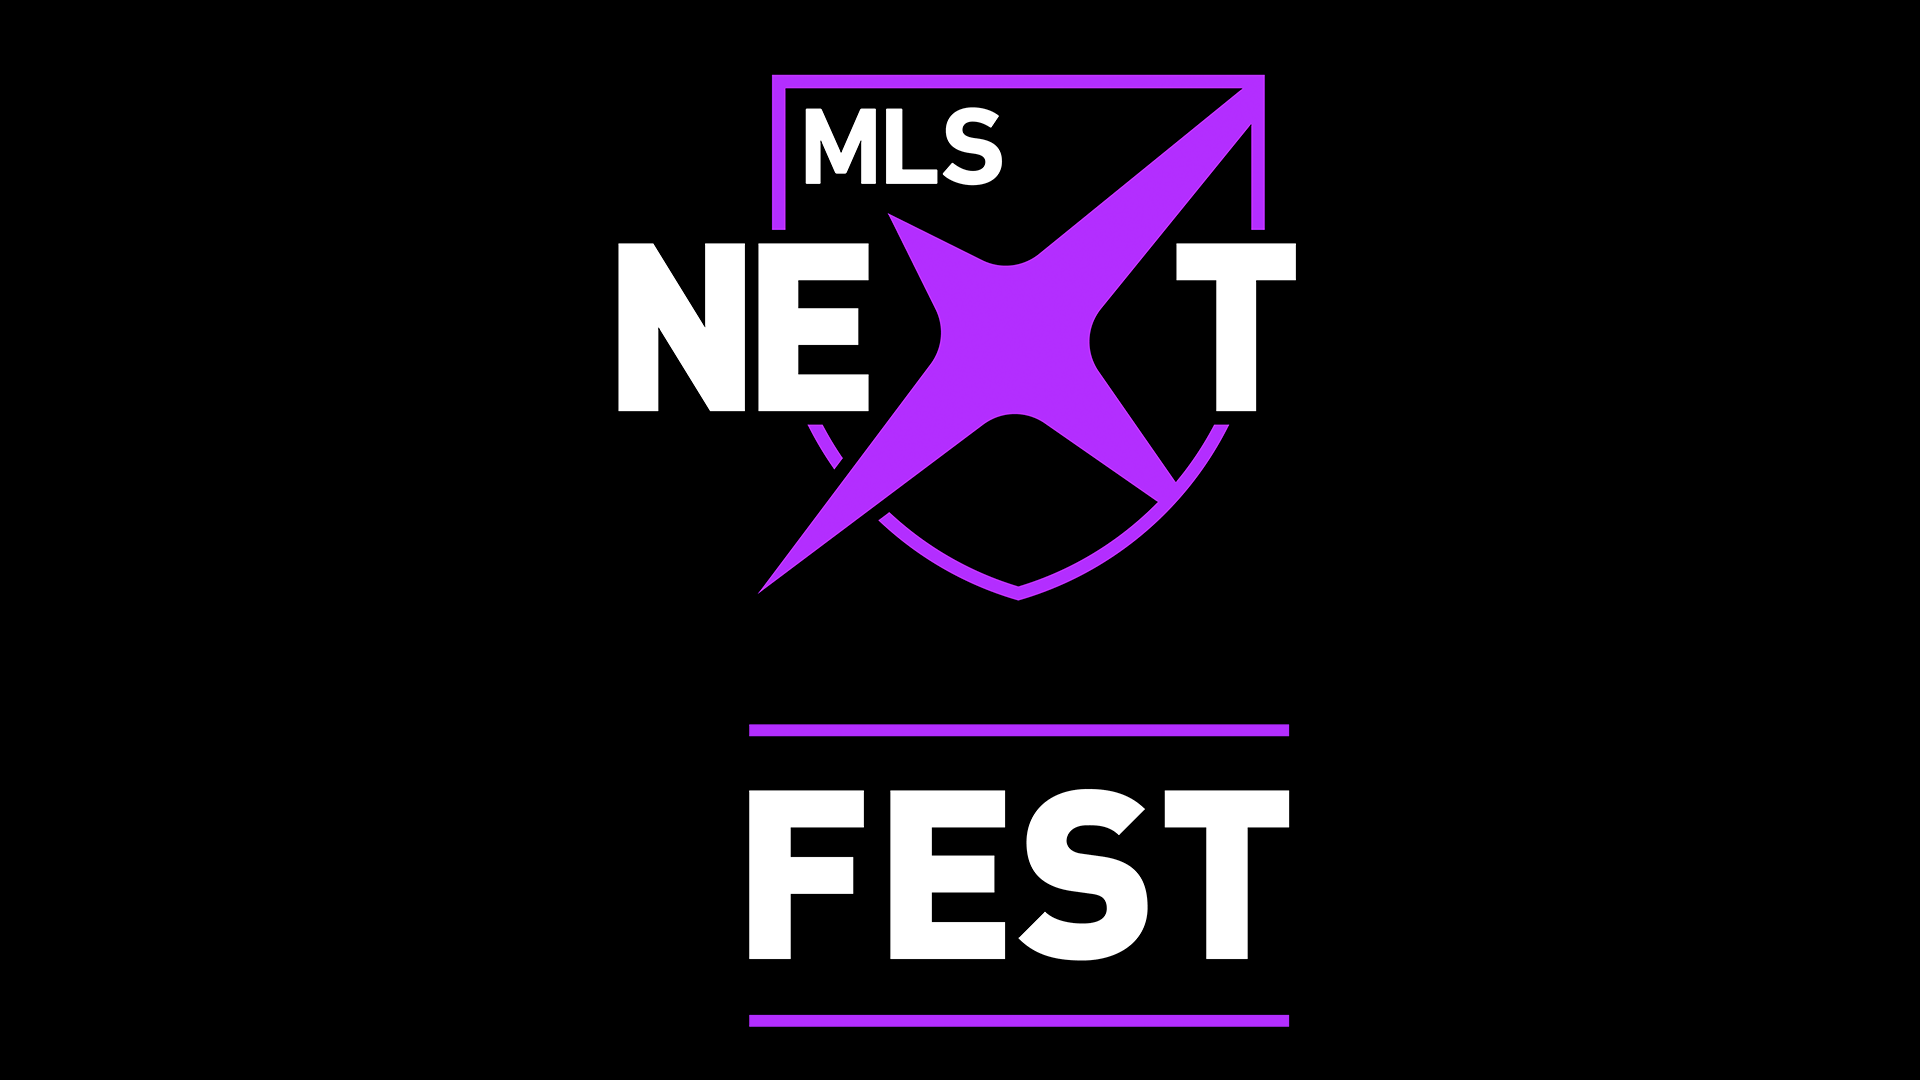 MLS NEXT adds 8 new clubs for 2022-23 season